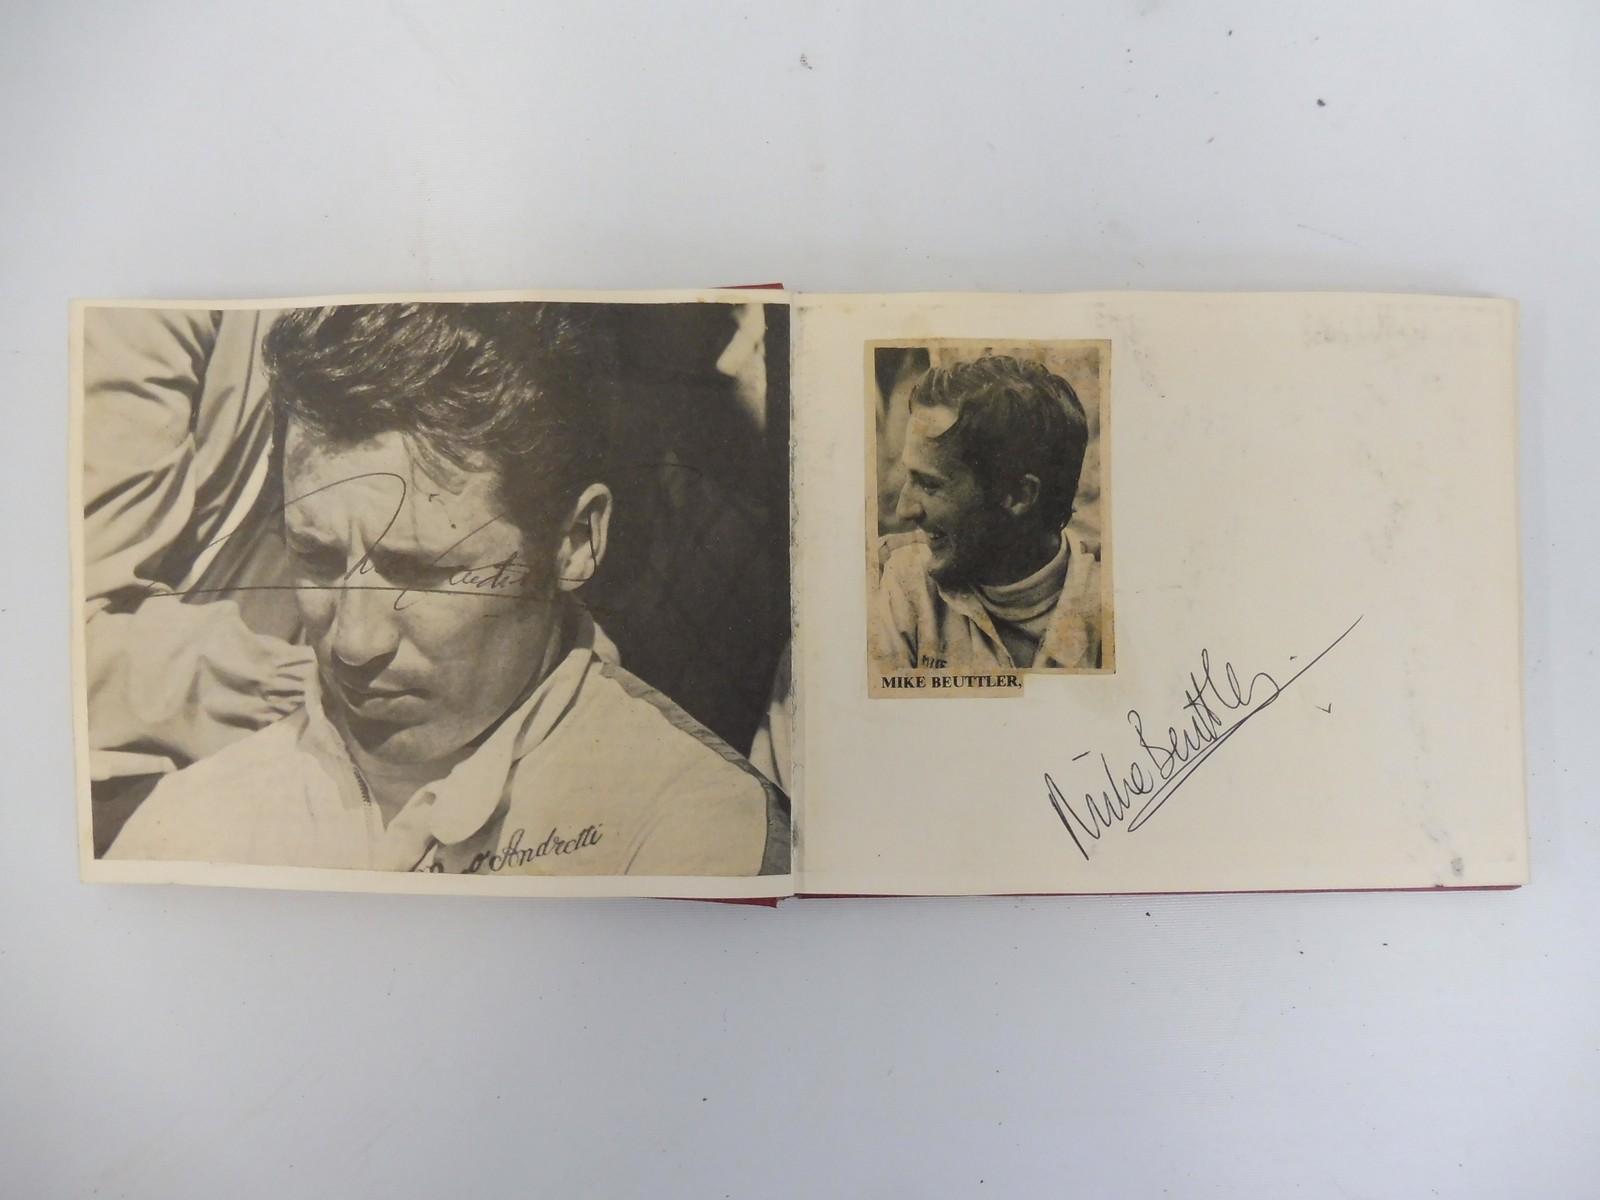 Two autograph albums containing an assortment of racing driver signatures including Jim Clark, - Image 9 of 12